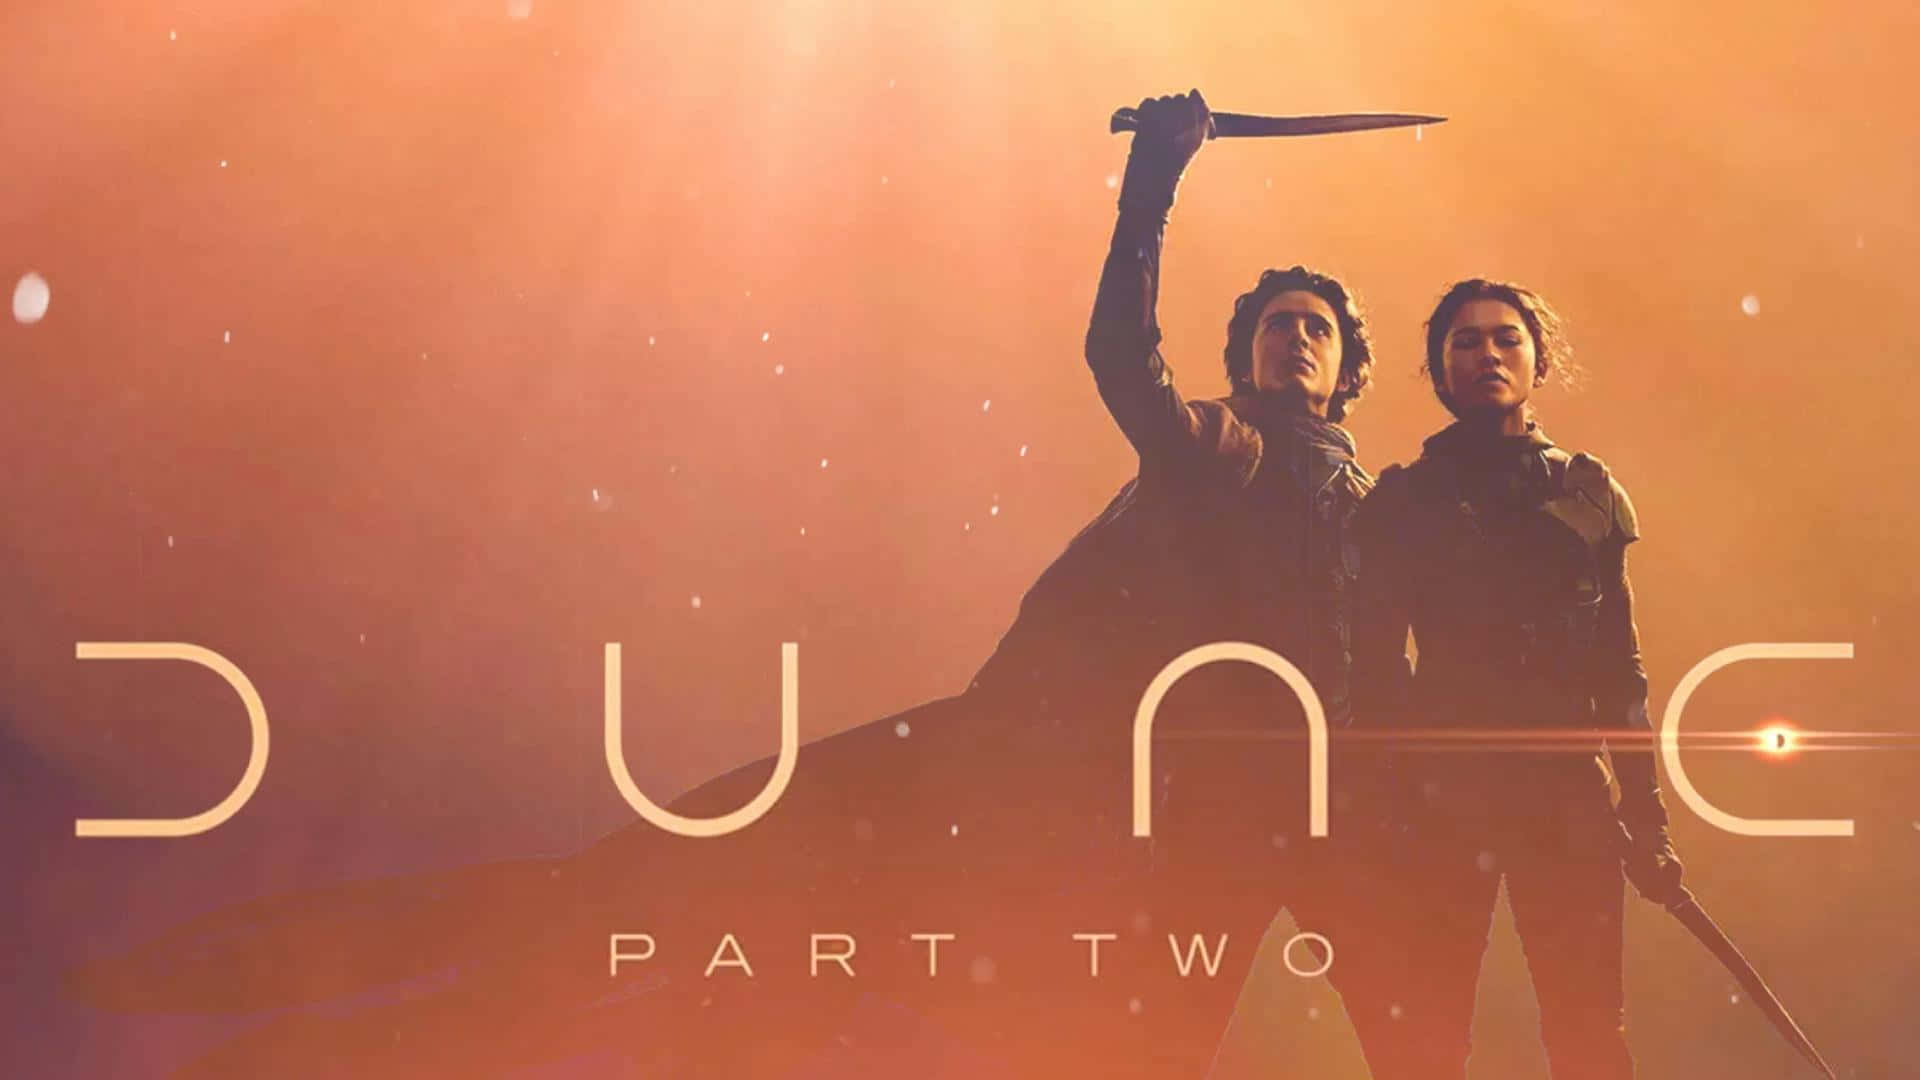 Dune Part Two Movie Poster Wallpaper